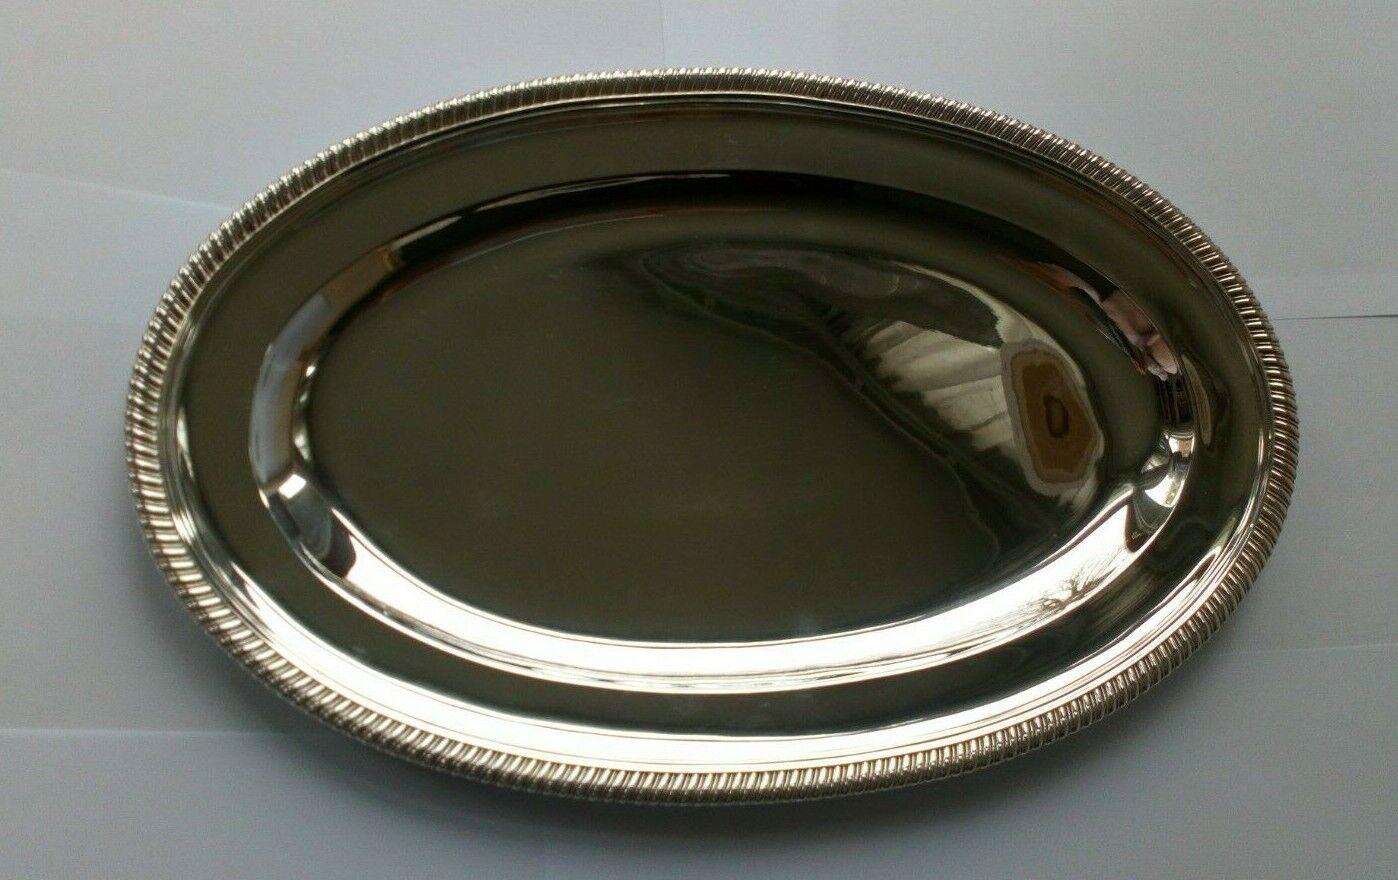 Large Sterling Silver Tray by Goldsmiths & Silversmiths Co Ltd from 1933

In good condition, this tray is oval with a plain body and styled borders.

Hallmarked: Made by Goldsmiths & Silversmiths Co Ltd in 112 Regent’s Street, London in 1933. The